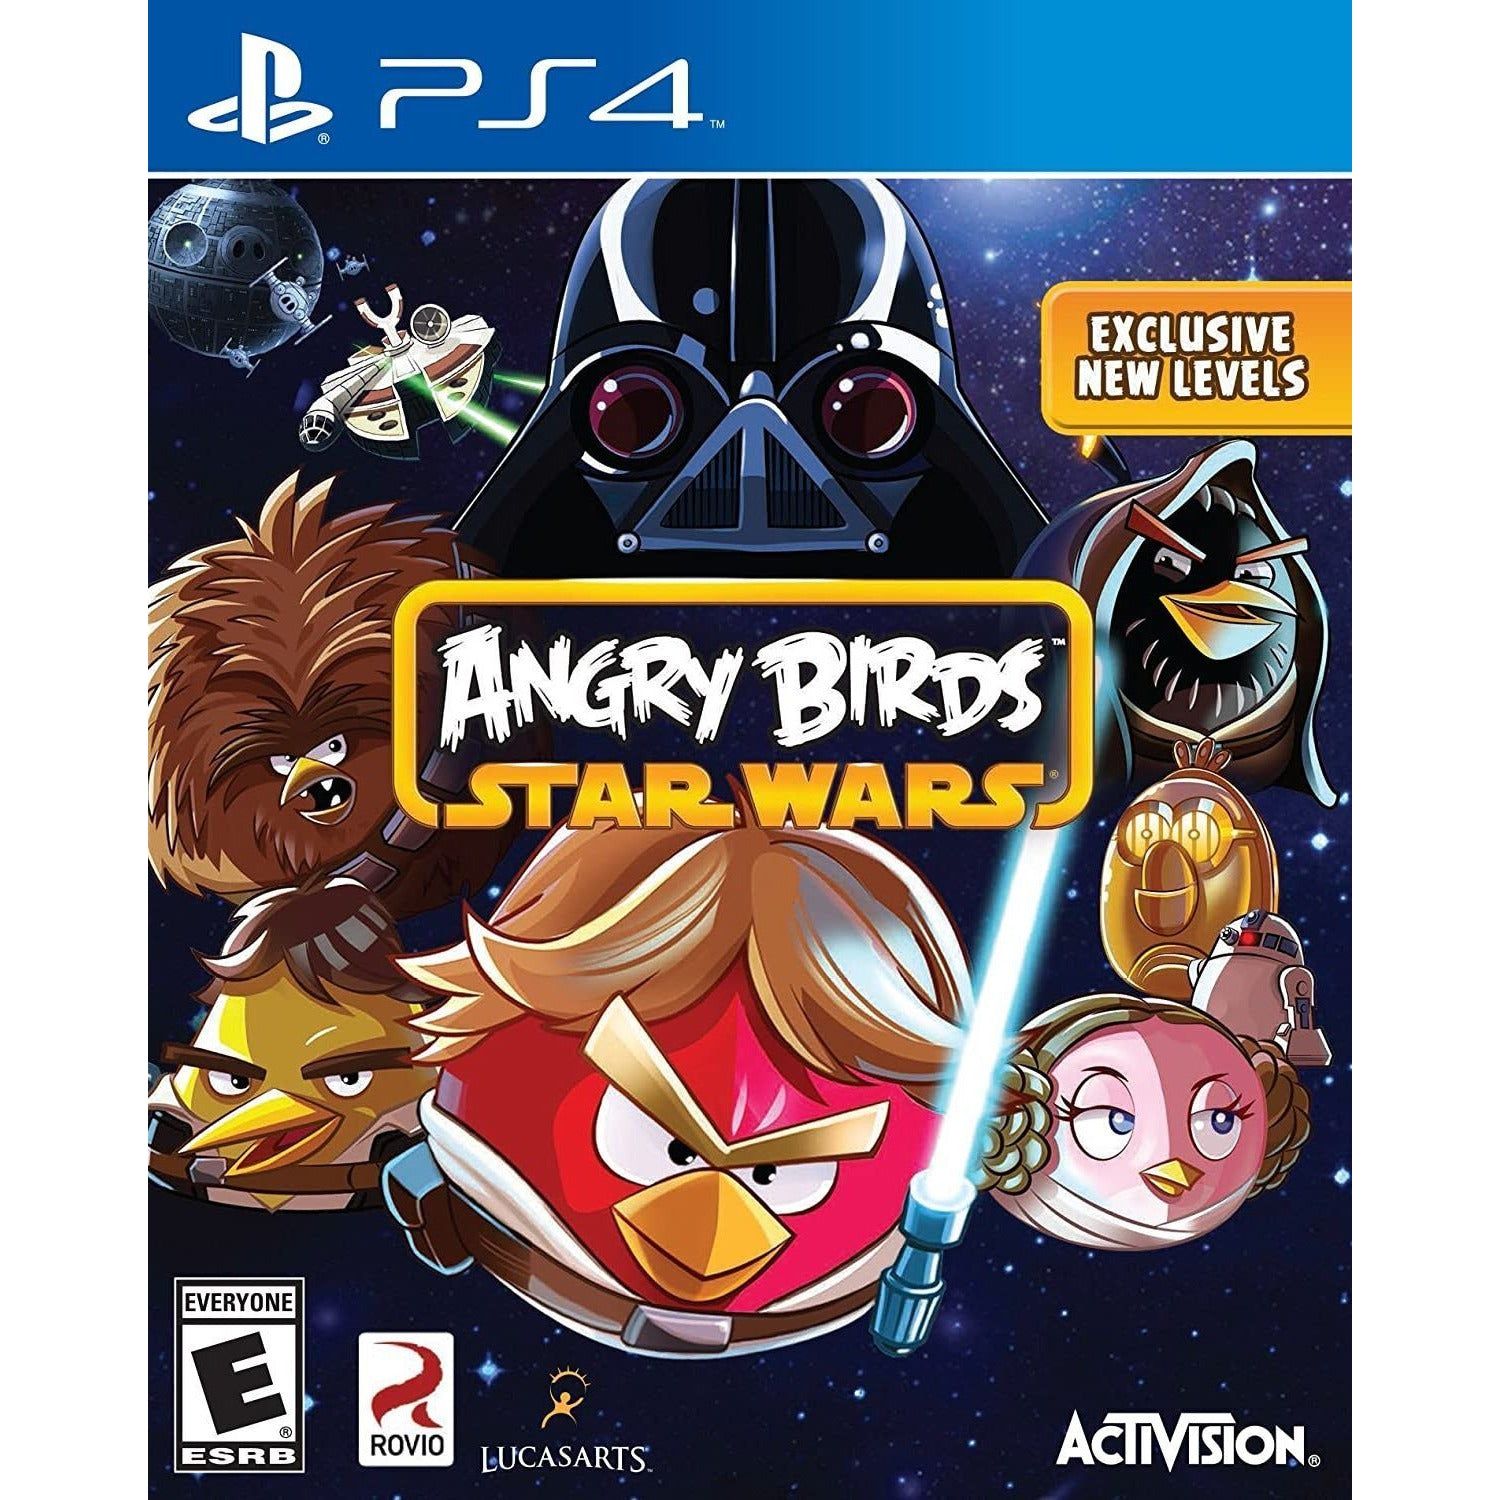 PS4 - Angry Birds Star Wars